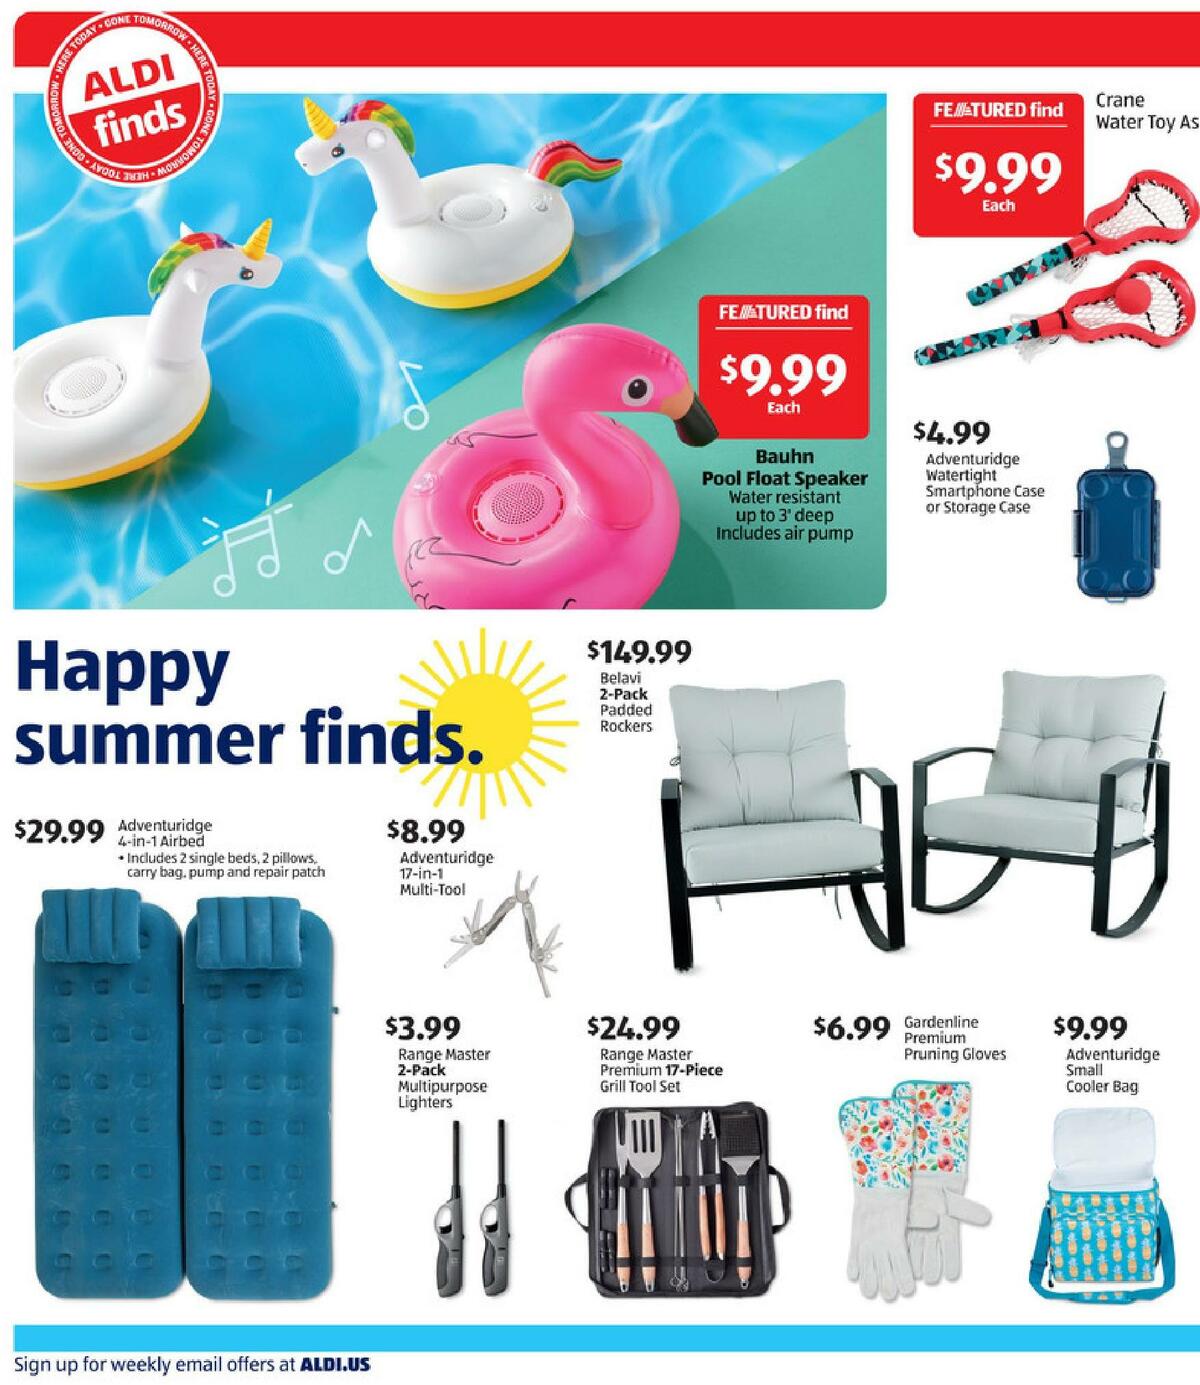 ALDI In Store Ad Weekly Ad from July 11